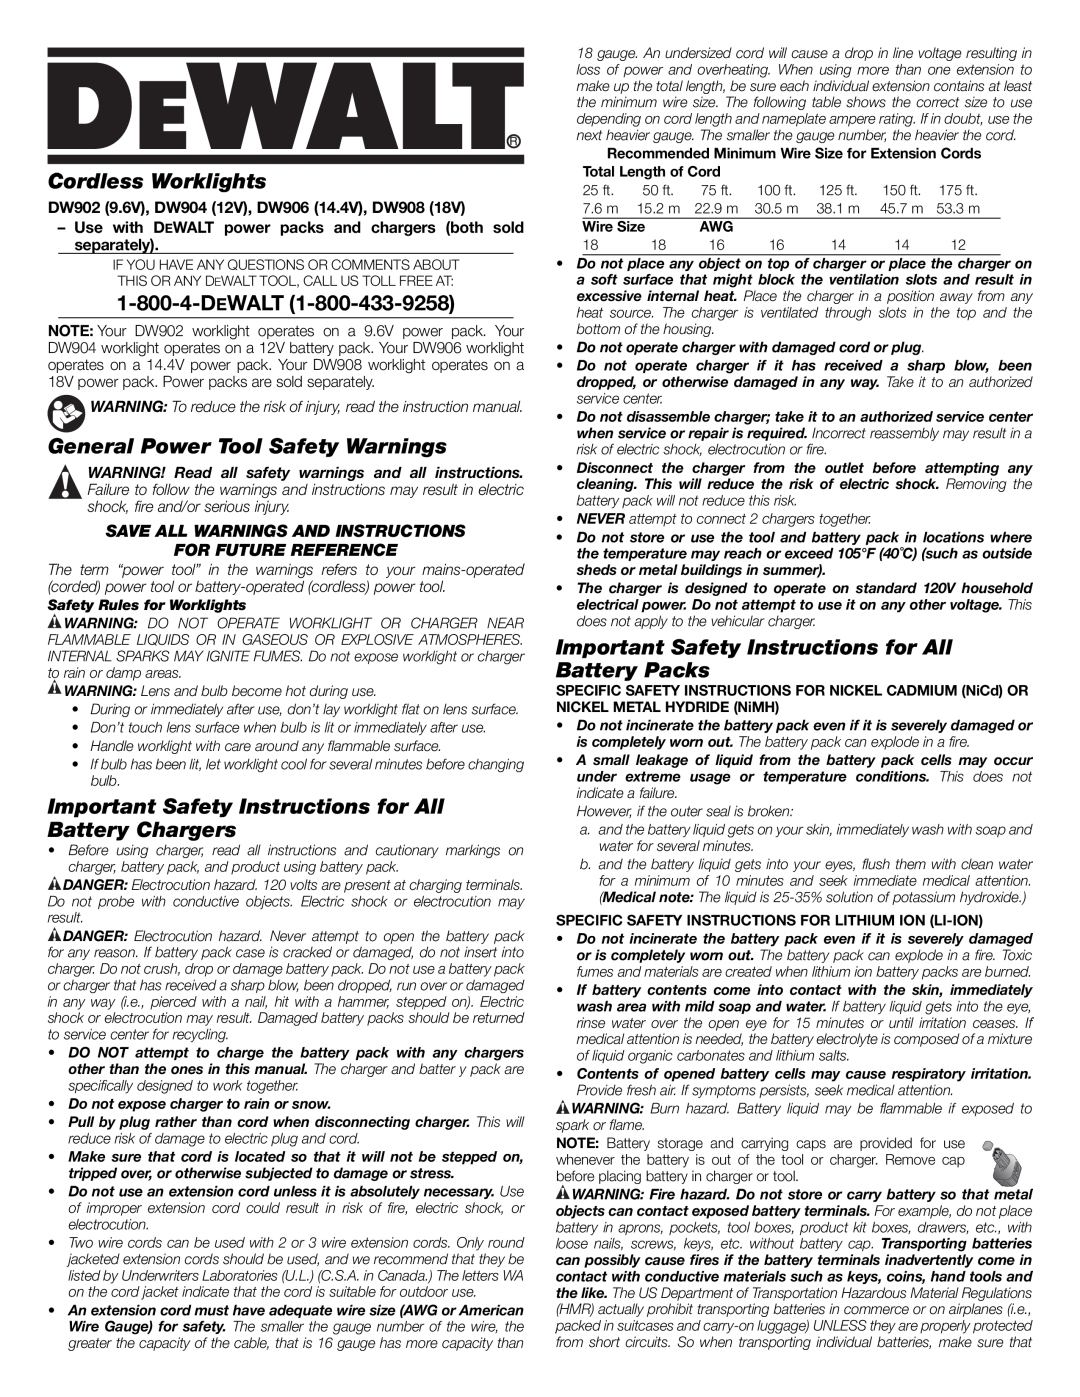 DeWalt DW904 important safety instructions Save All Warnings And Instructions, For Future Reference, Wire Size 